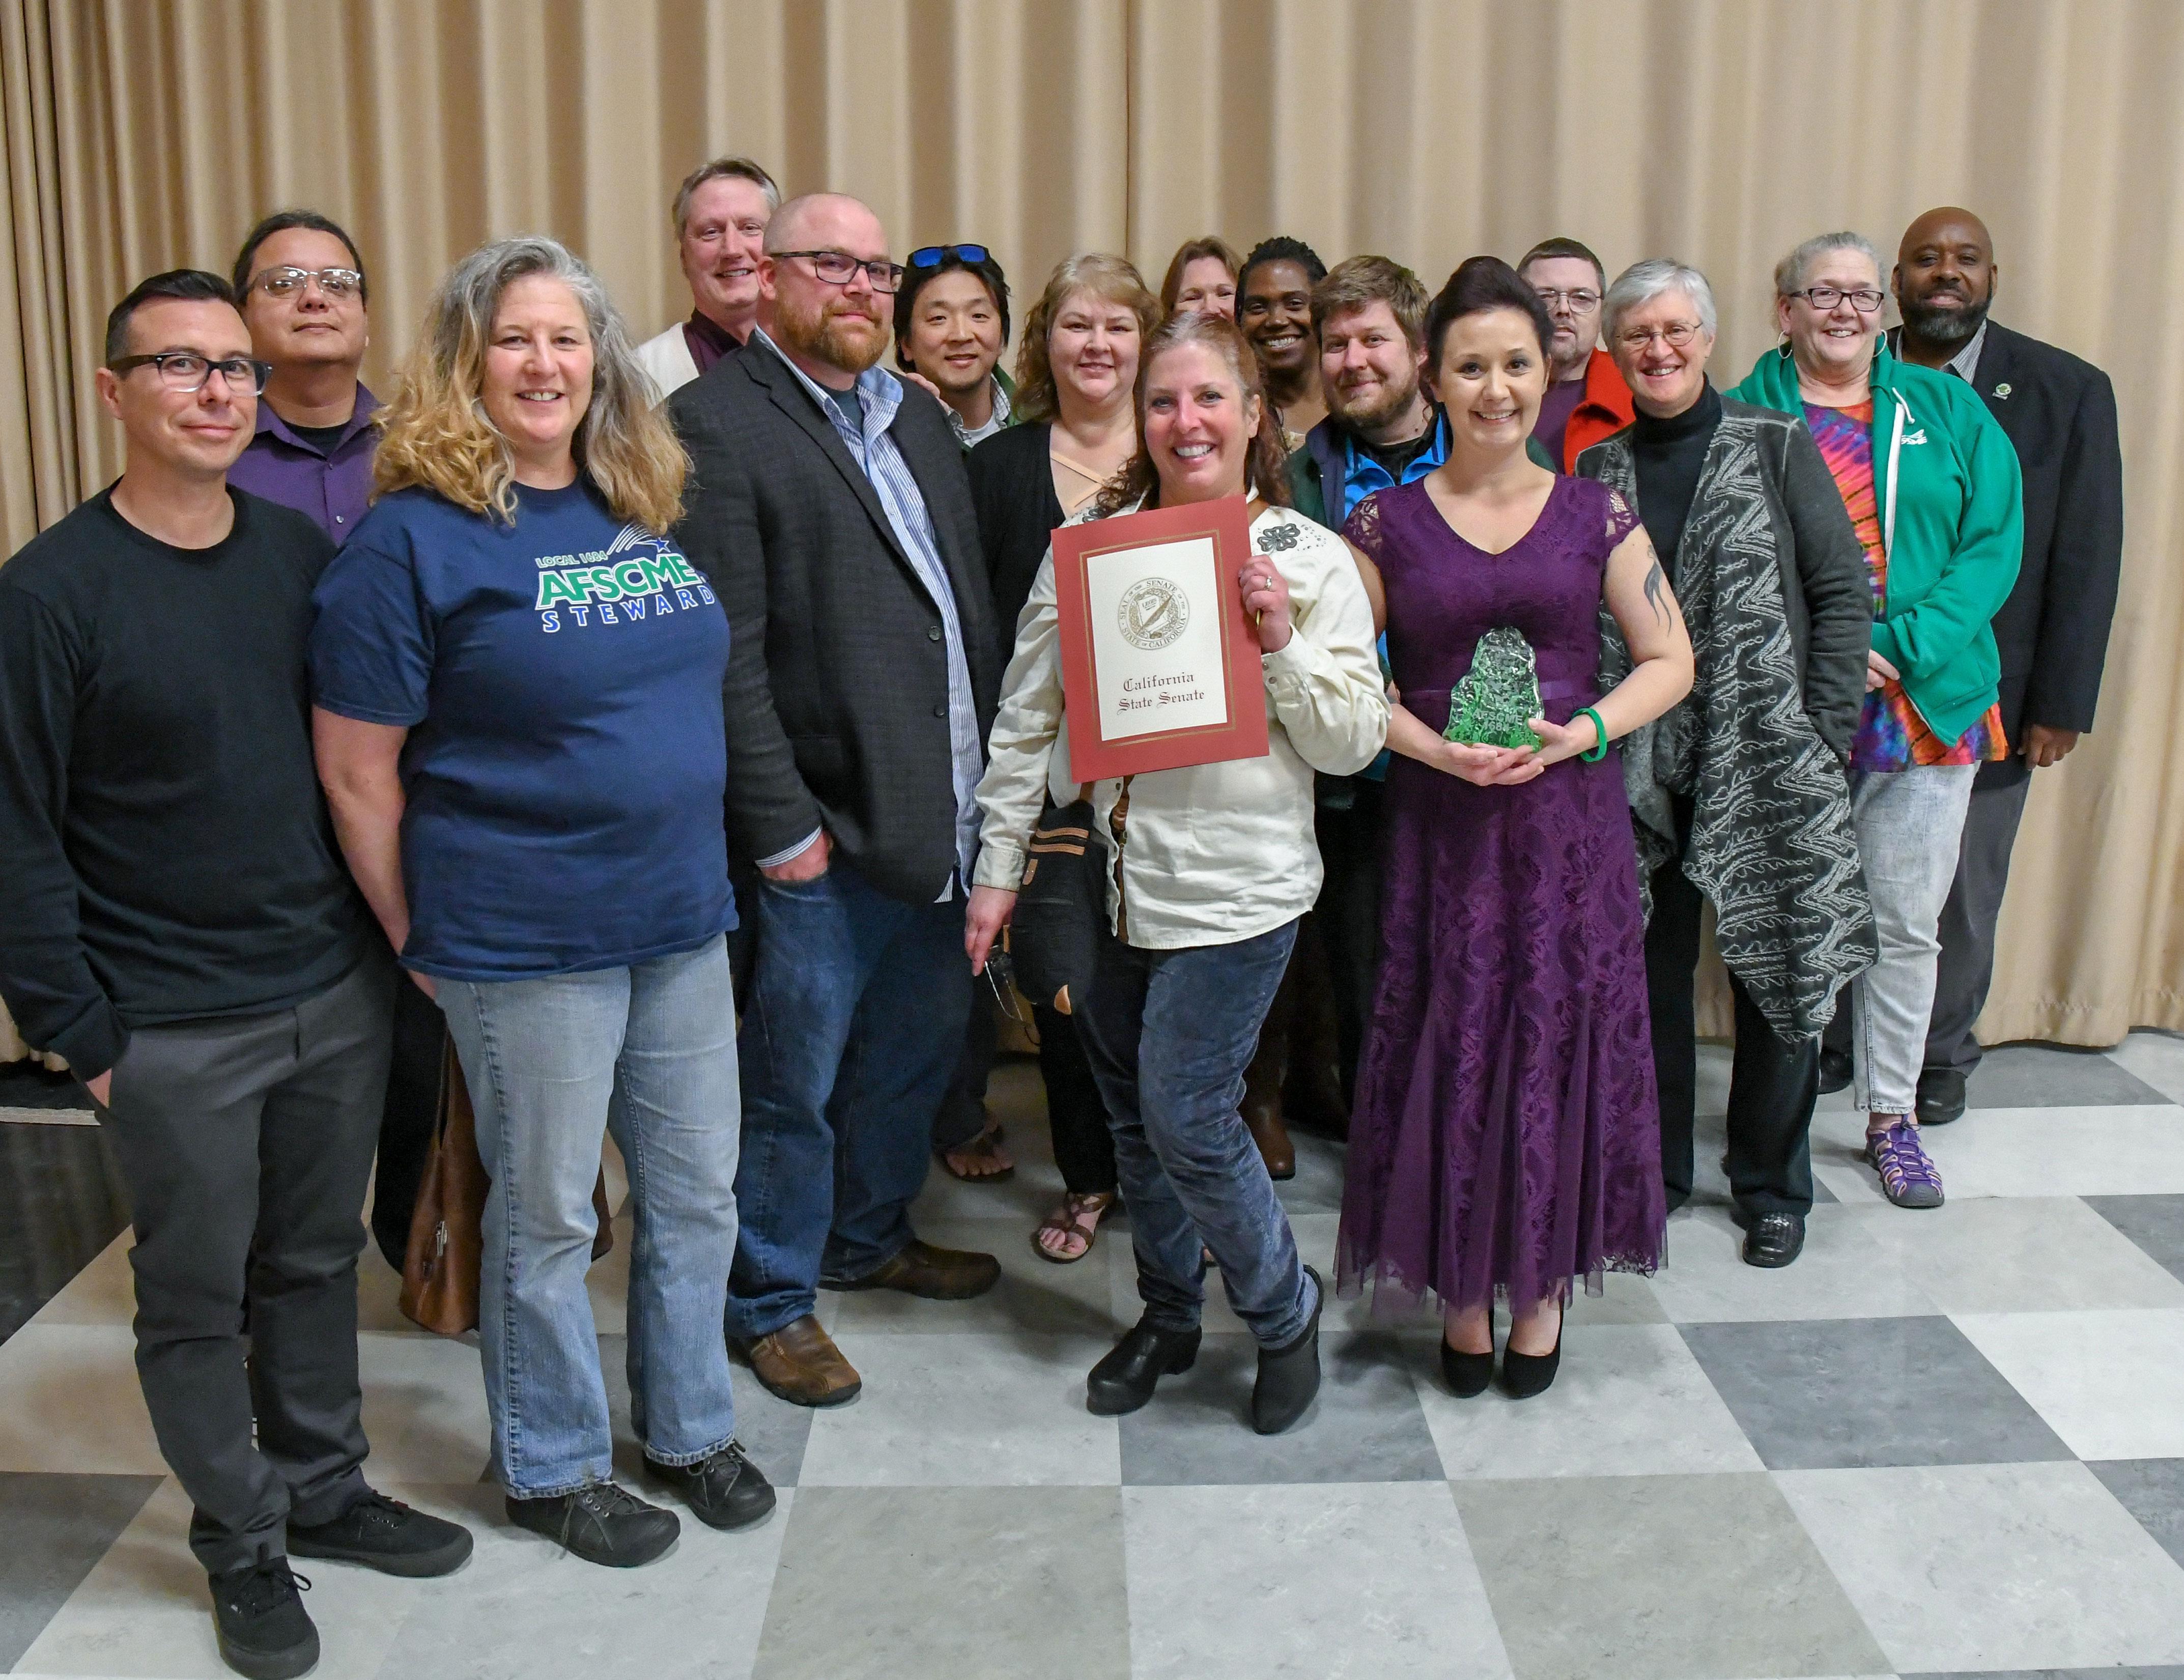 AFSCME Local 1684, Union of the Year for 2018